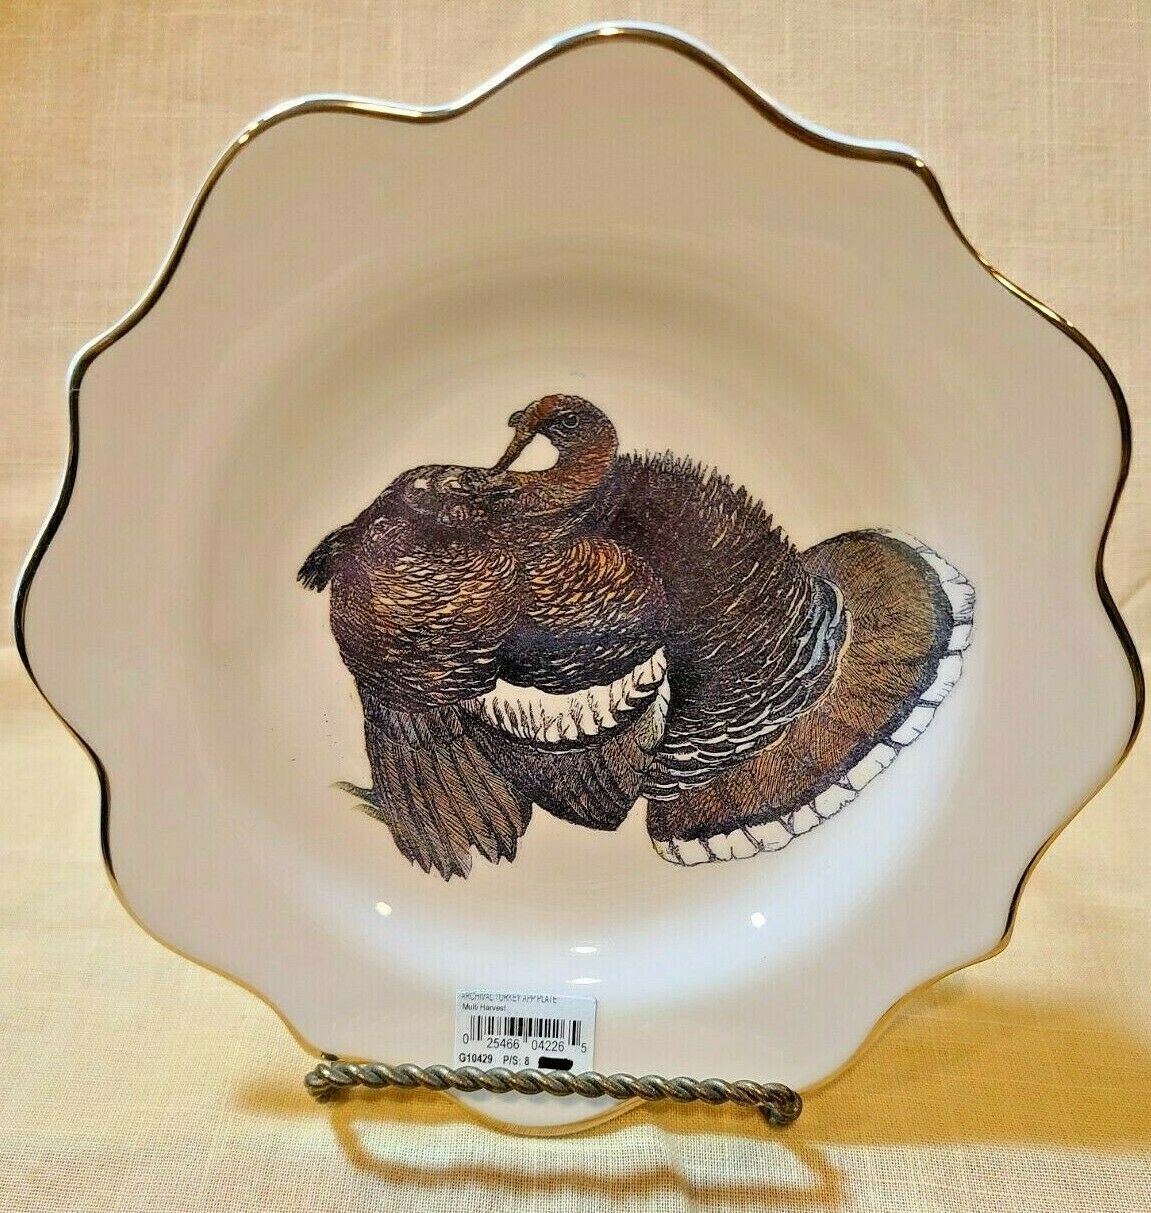 Tag Archival Thanksgiving Turkey Appetizer Plate with Gold Trim - $24.99